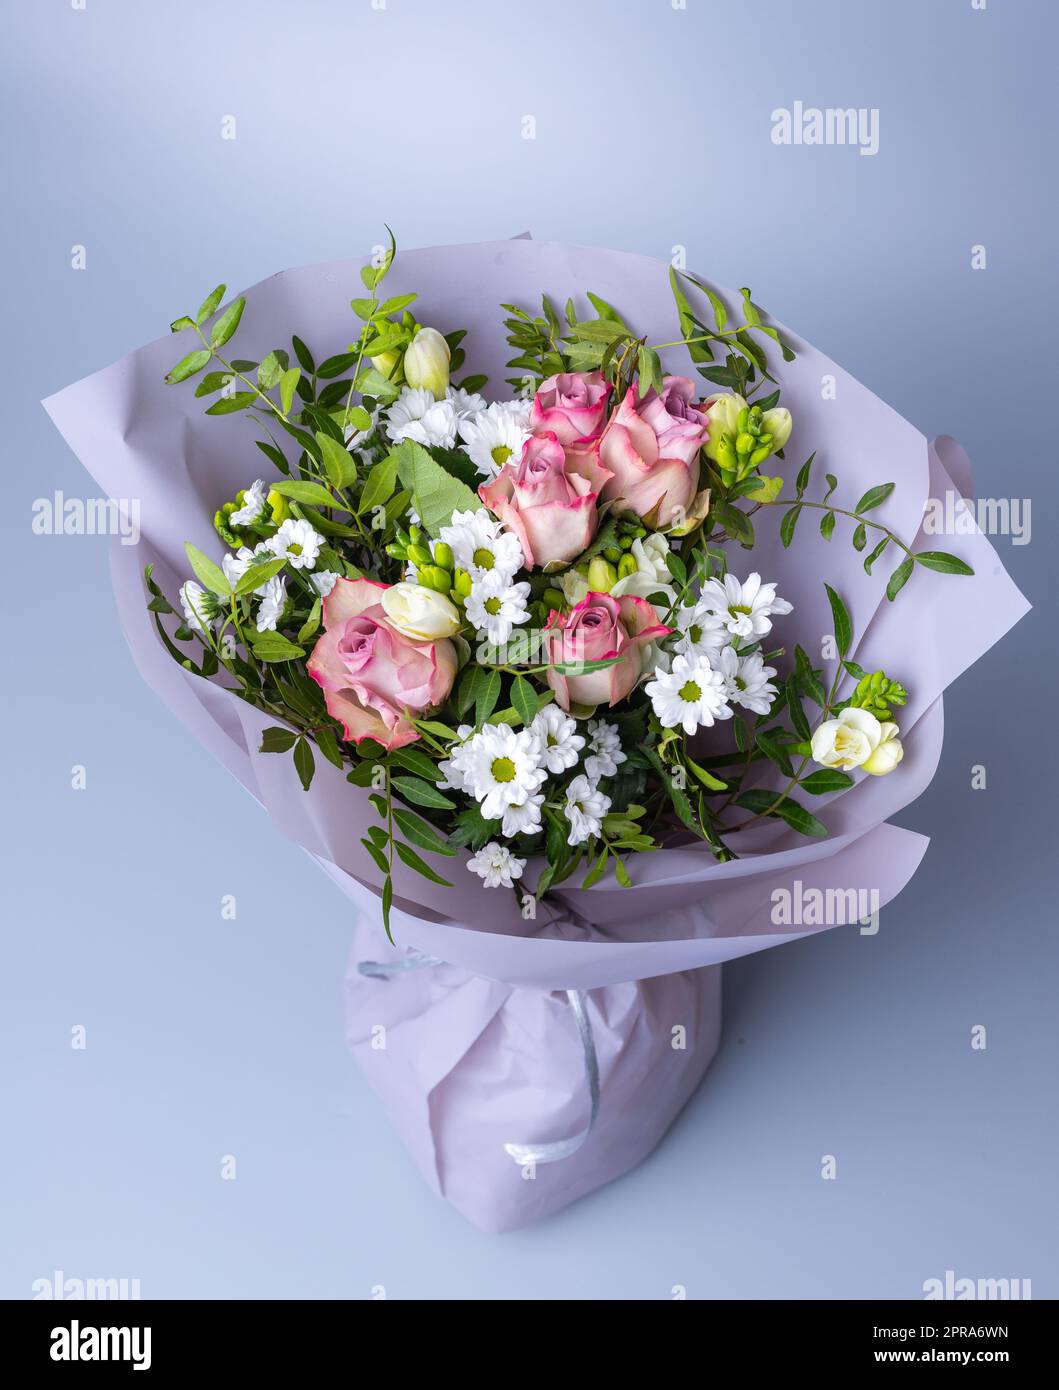 Top view of a bouquet of roses and green twigs on a blue background. Stock Photo